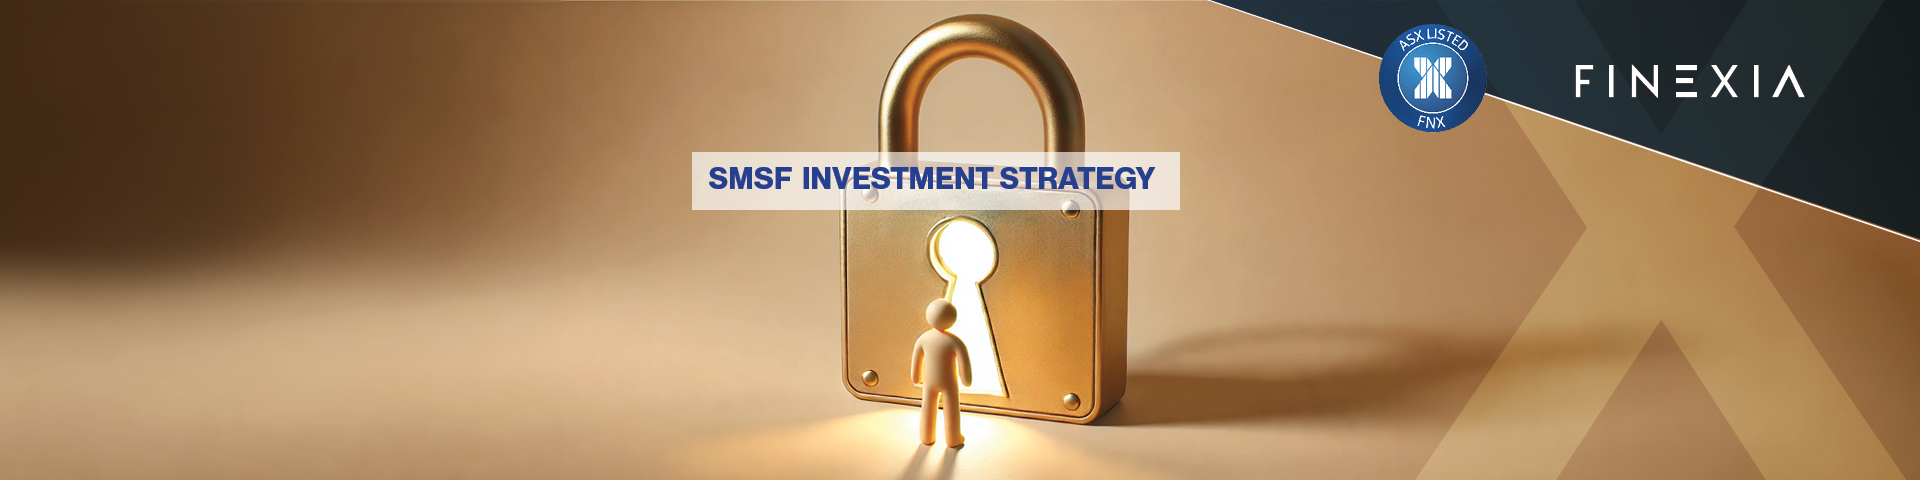 Crafting the Ultimate Investment Strategy for Your SMSF